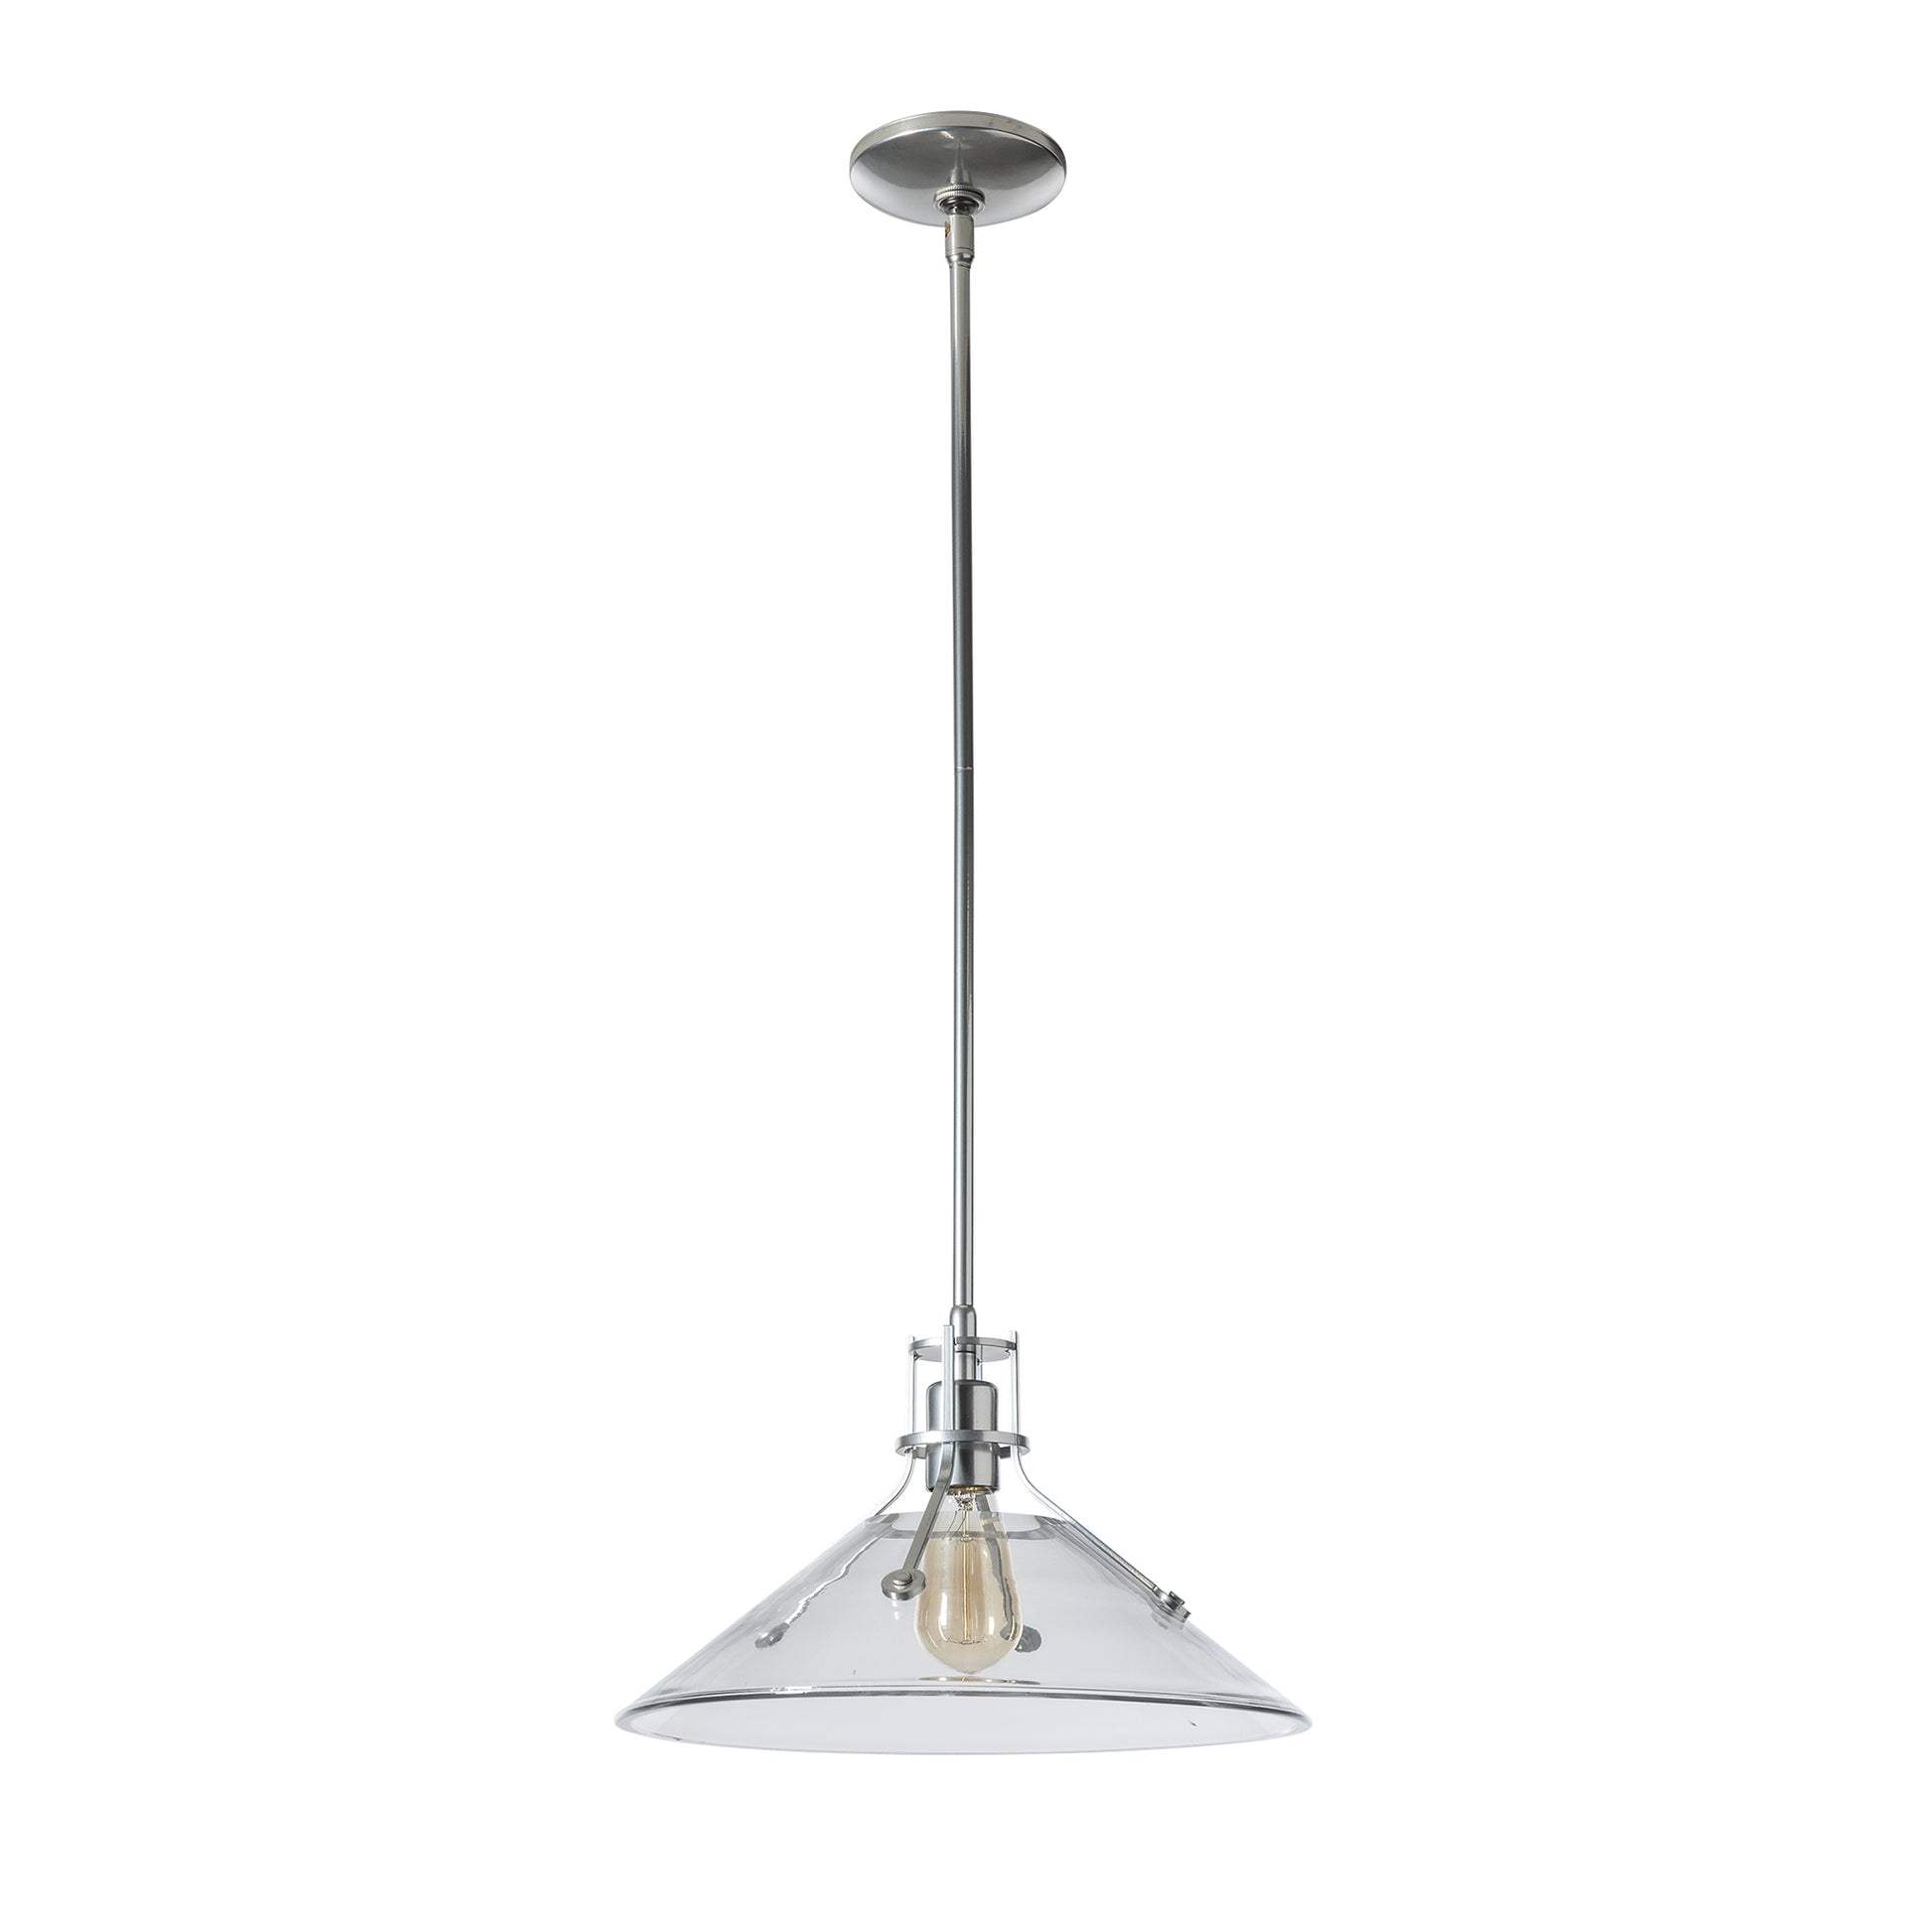 A modern Hubbardton Forge Henry Medium Glass Shade Pendant with a clear glass shade.